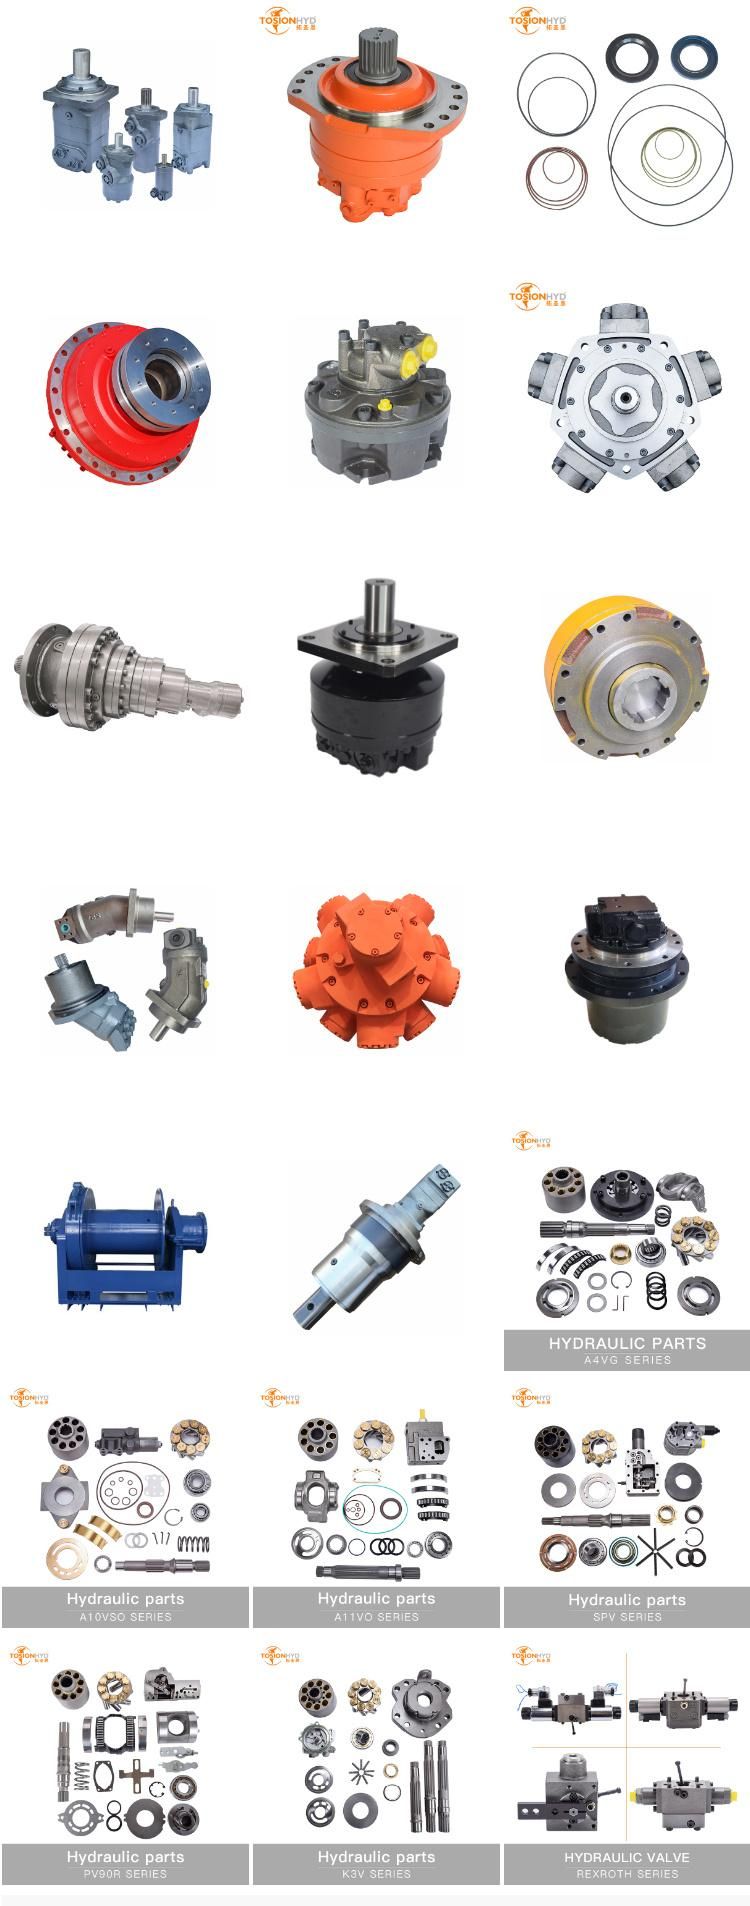 A2fe 56 Hydraulic Motor Parts with Rexroth Spare Repair Kits